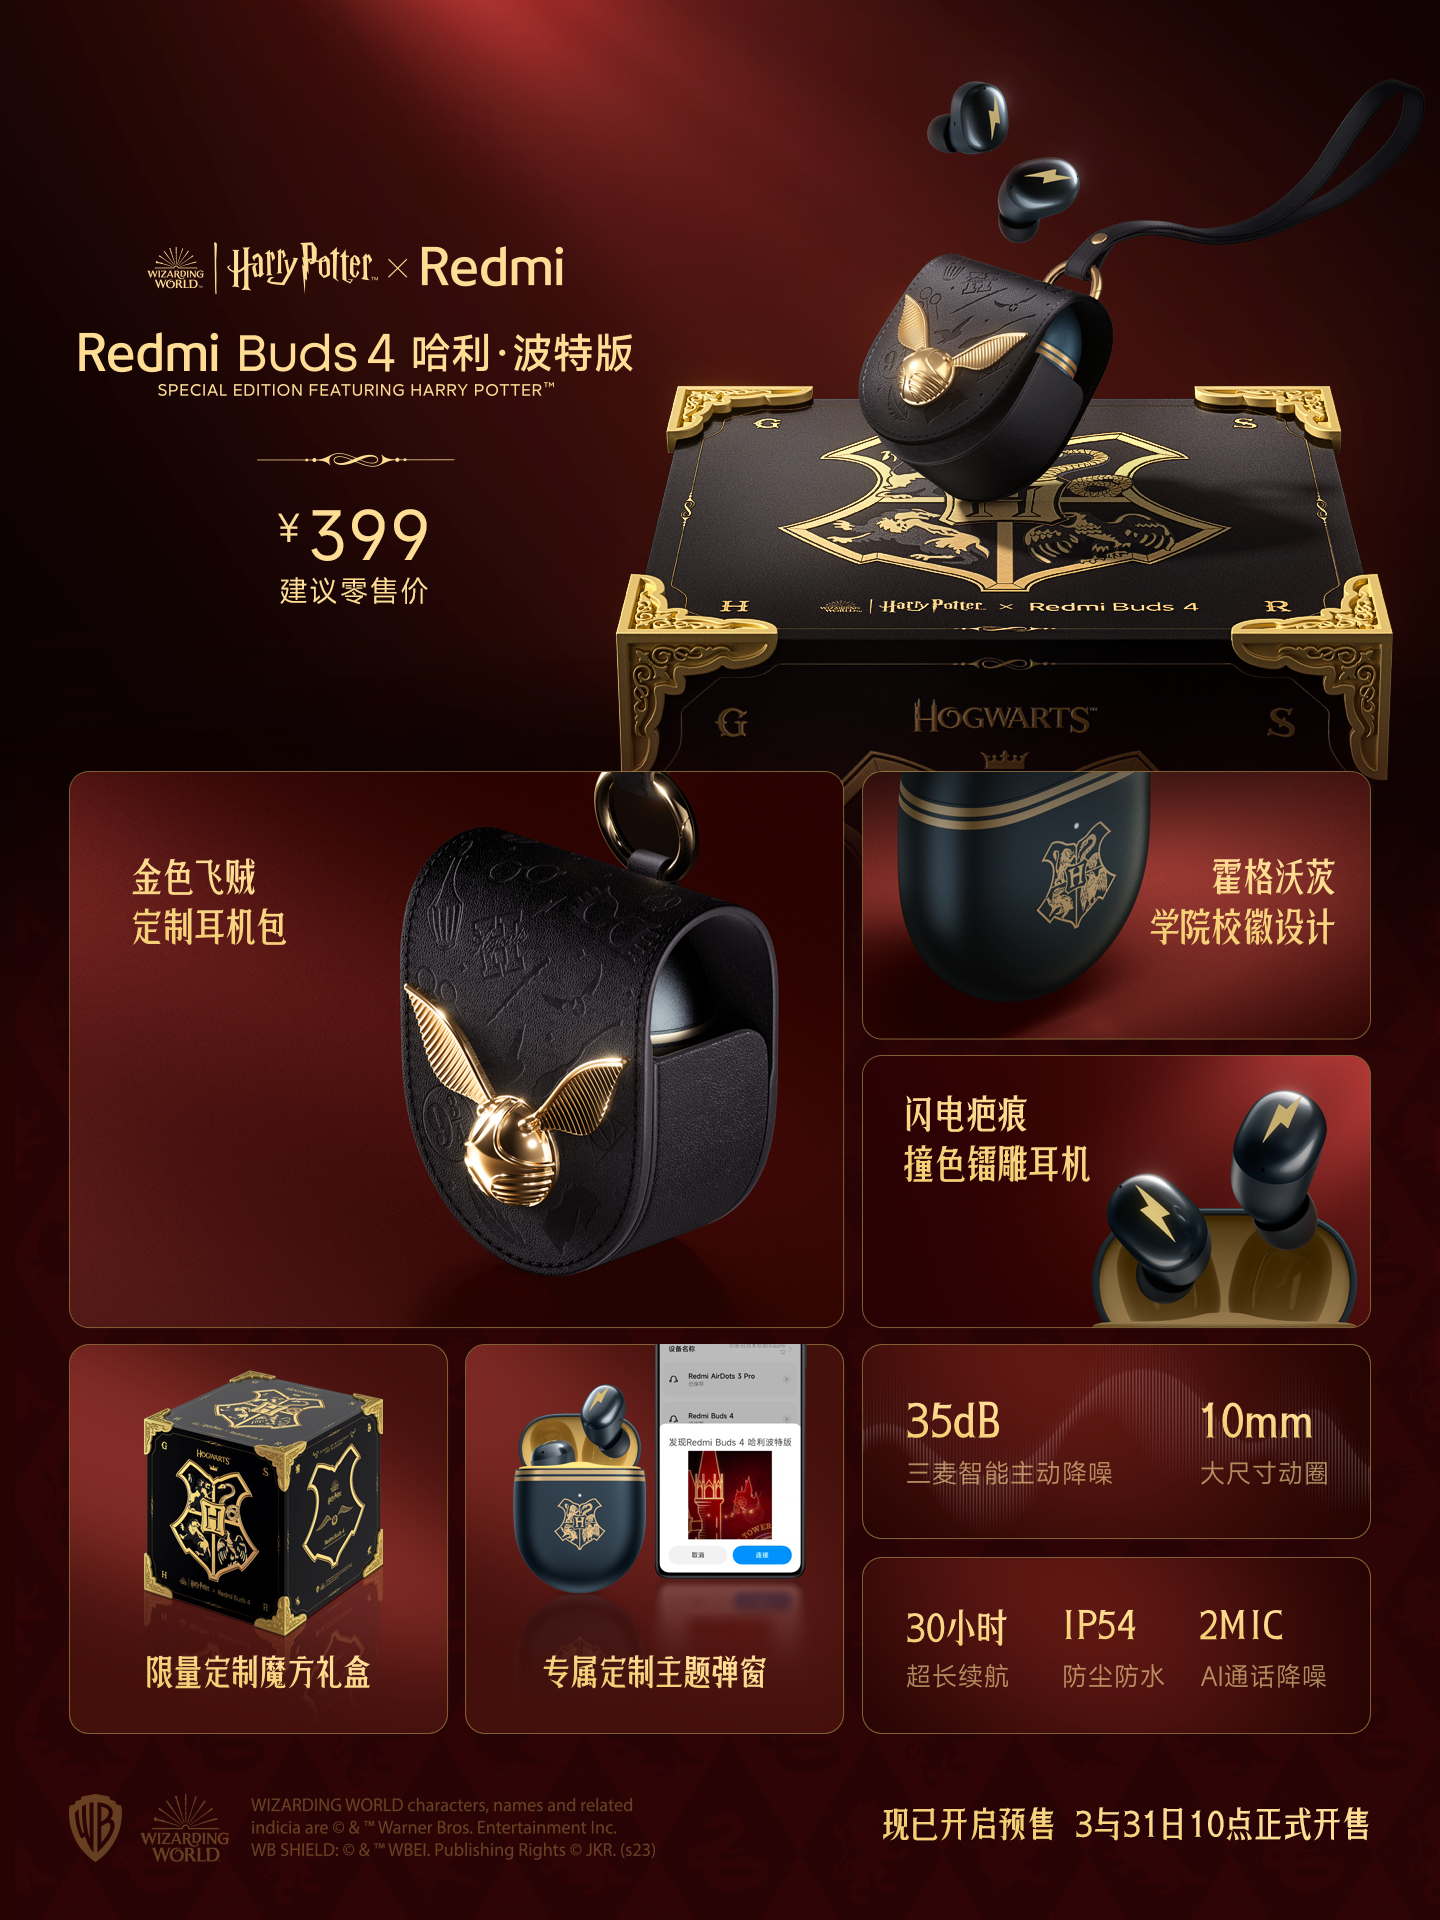 Xiaomi unveils $58 special edition Redmi Buds 4 for Harry Potter fans